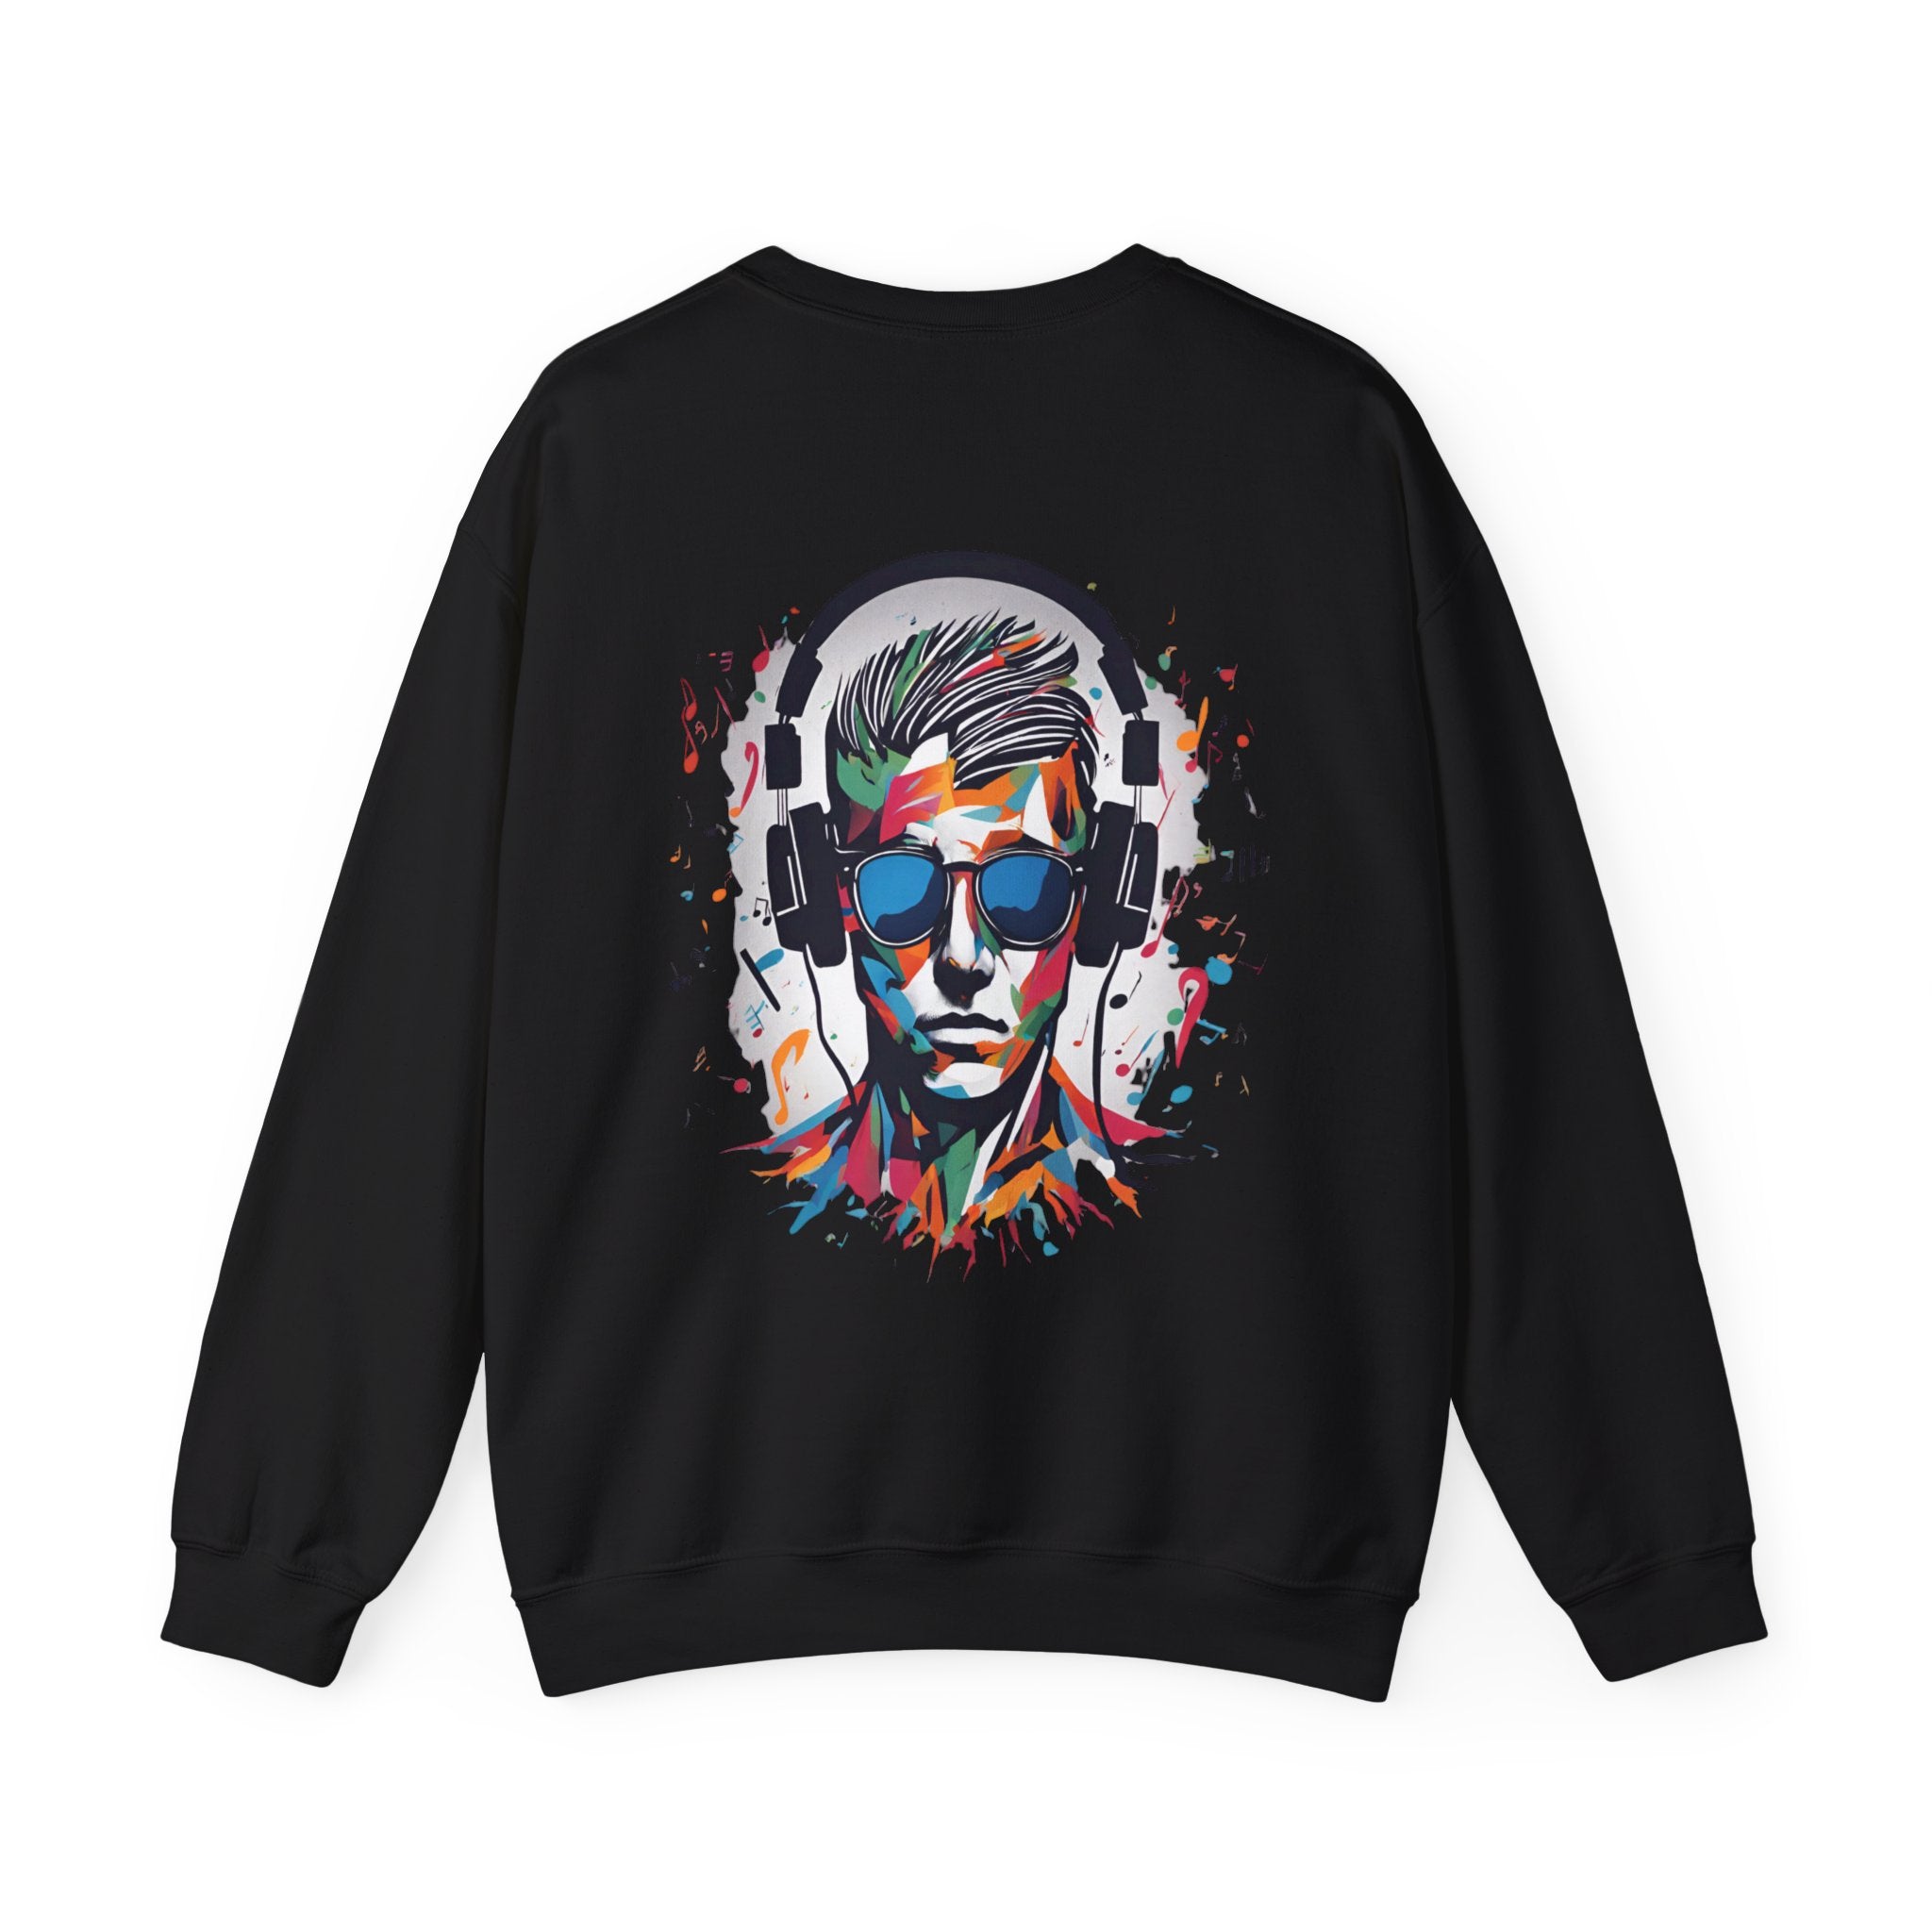 Hit the Right Notes Sweatshirt: For mental health Graphite Heather Casual Sweatshirt Comfy Sweater Cozy Sweatshirt Crewneck Sweatshirt Fleece Pullover Graphic Sweatshirt Men's Sweatshirt Sweatshirt Warm Outerwear Women's Sweatshirt Sweatshirt 8876076540910355488_2048 Printify